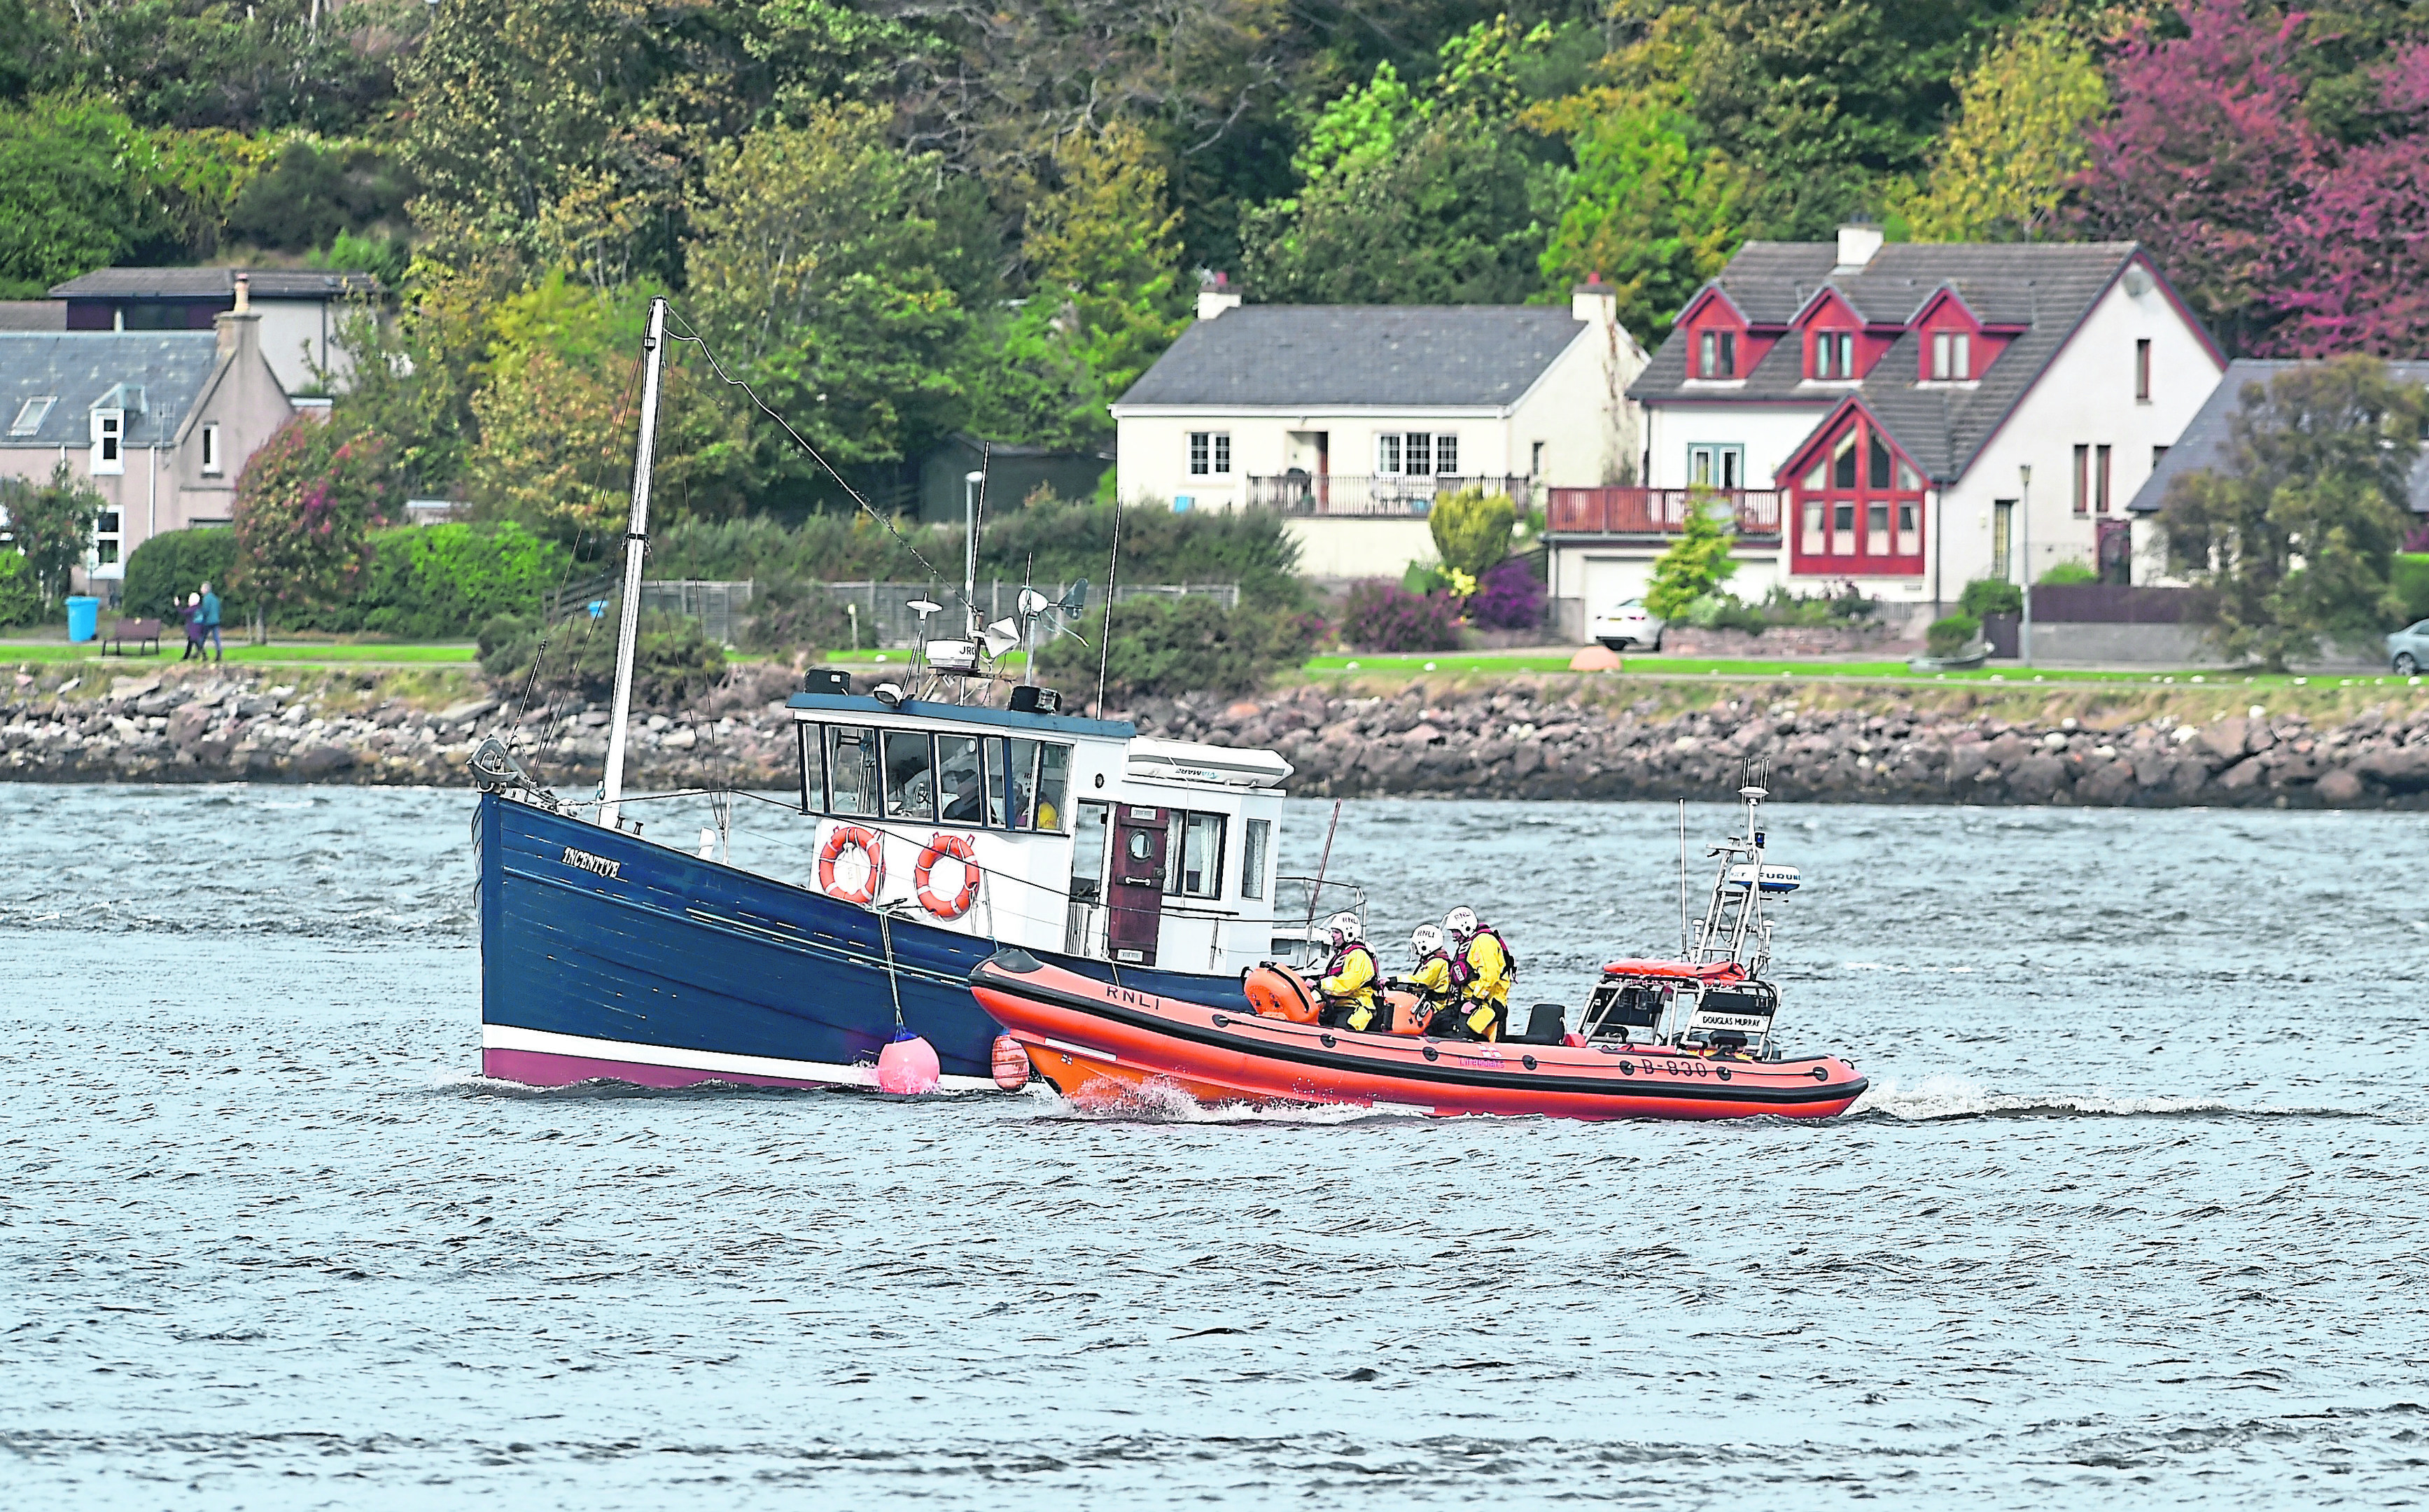 The Incentive  is assisted back in to Inverness Marina by the North Kessock lifeboat.